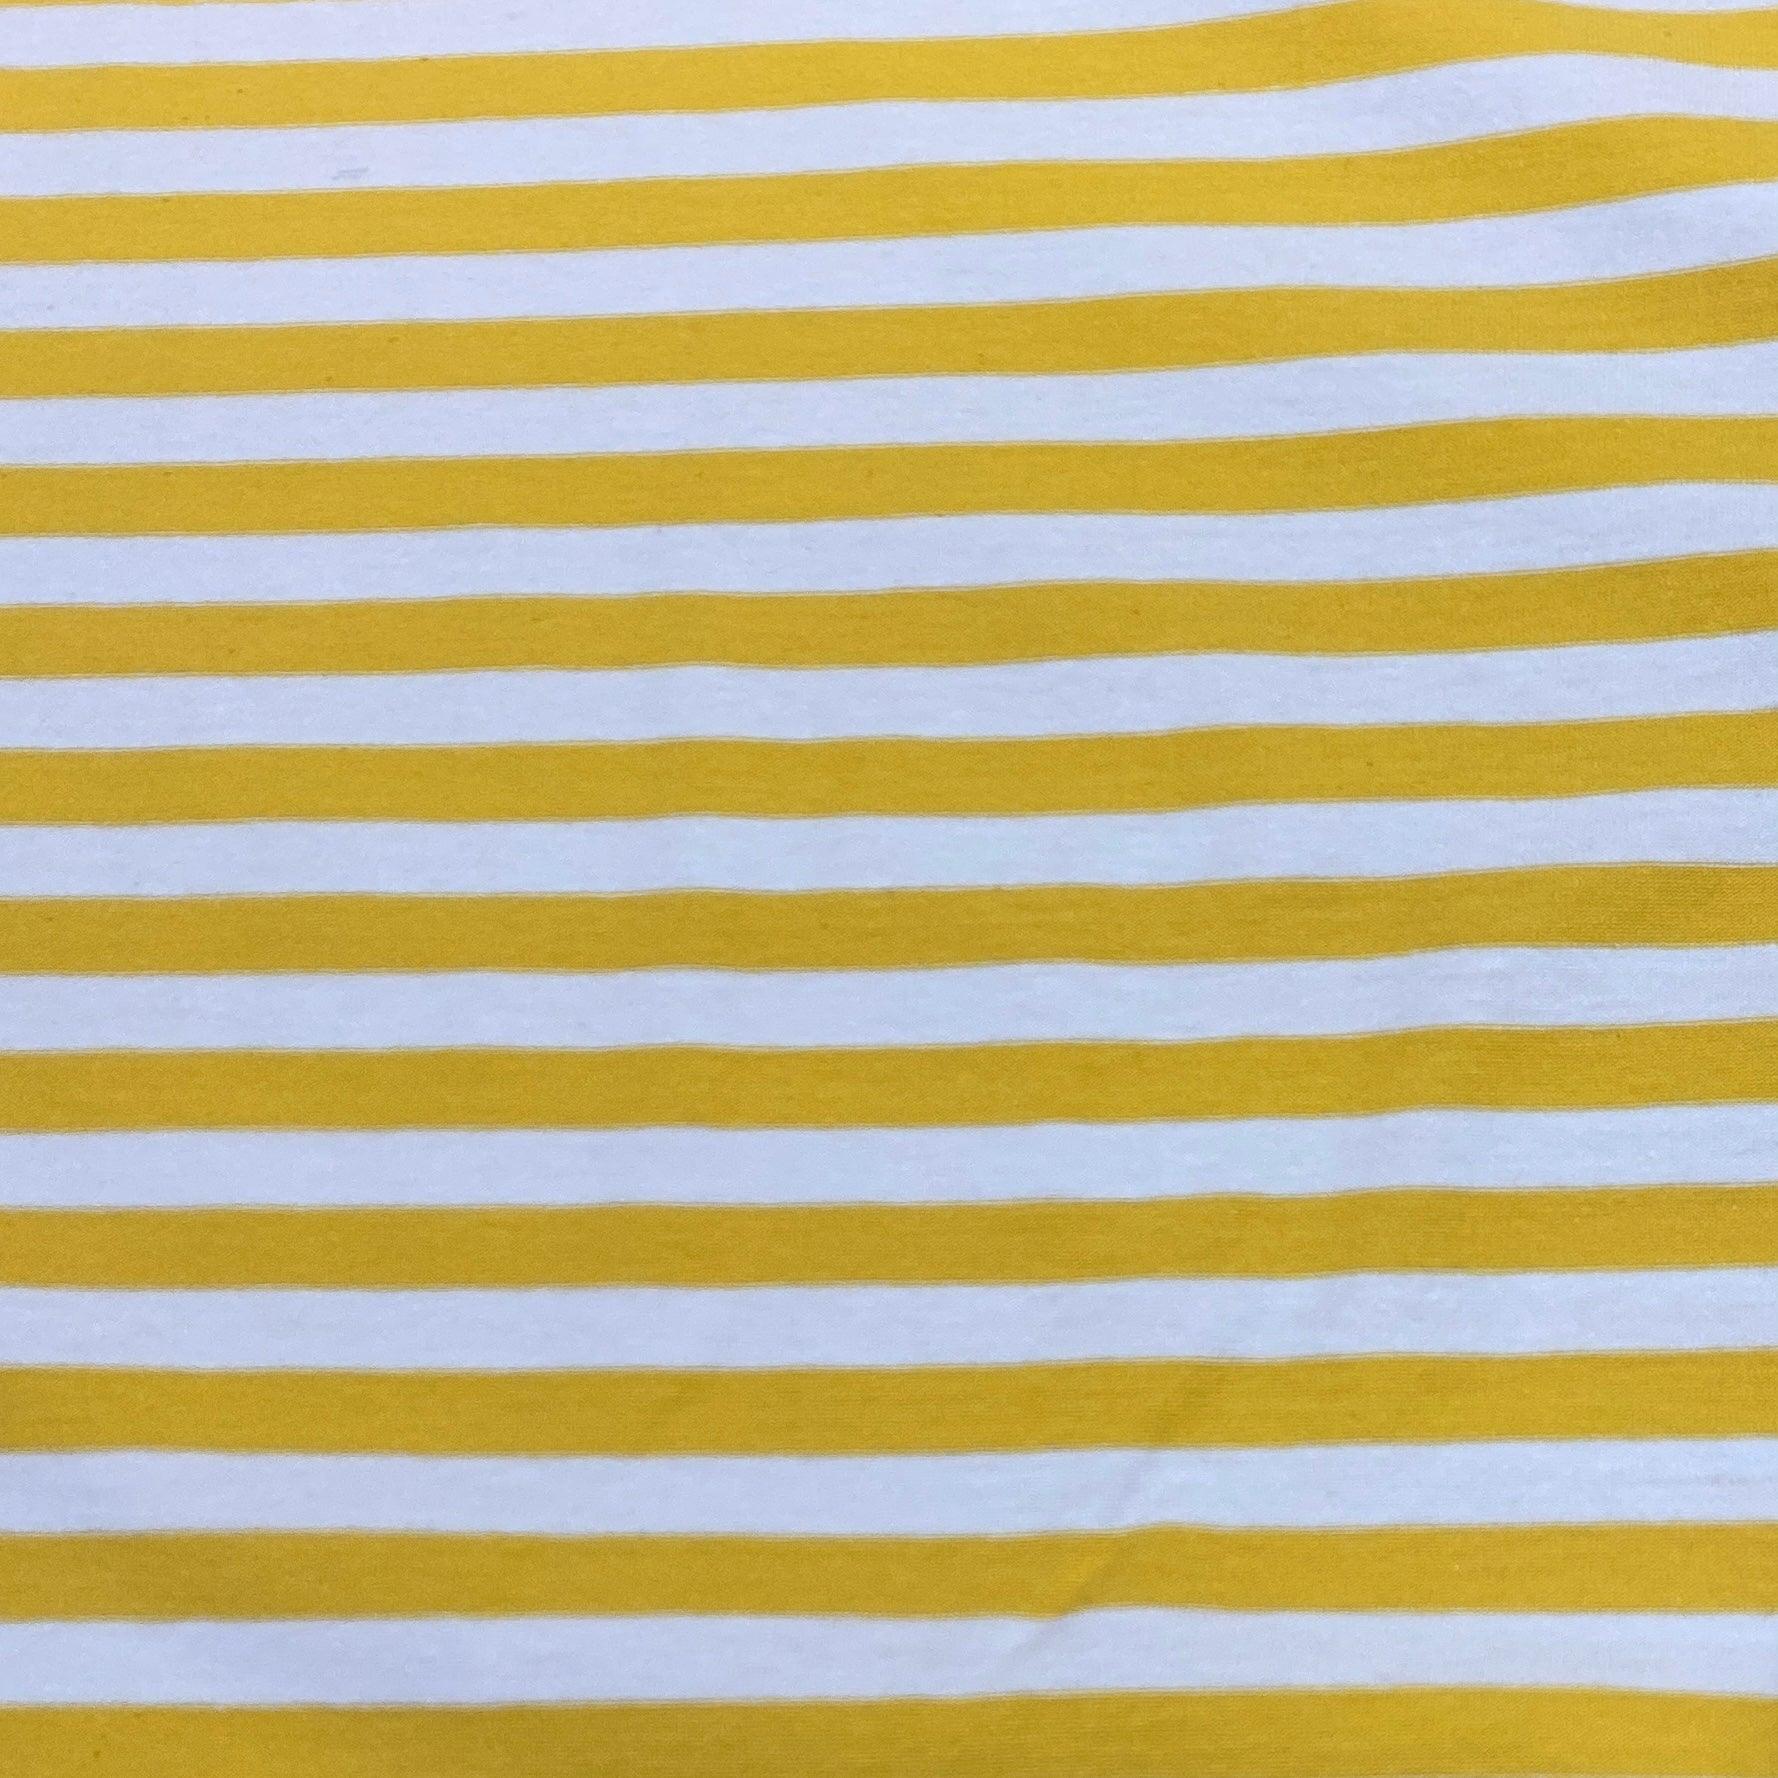 Yellow and White 3/8" Stripes on Cotton/Spandex Jersey Fabric - Nature's Fabrics